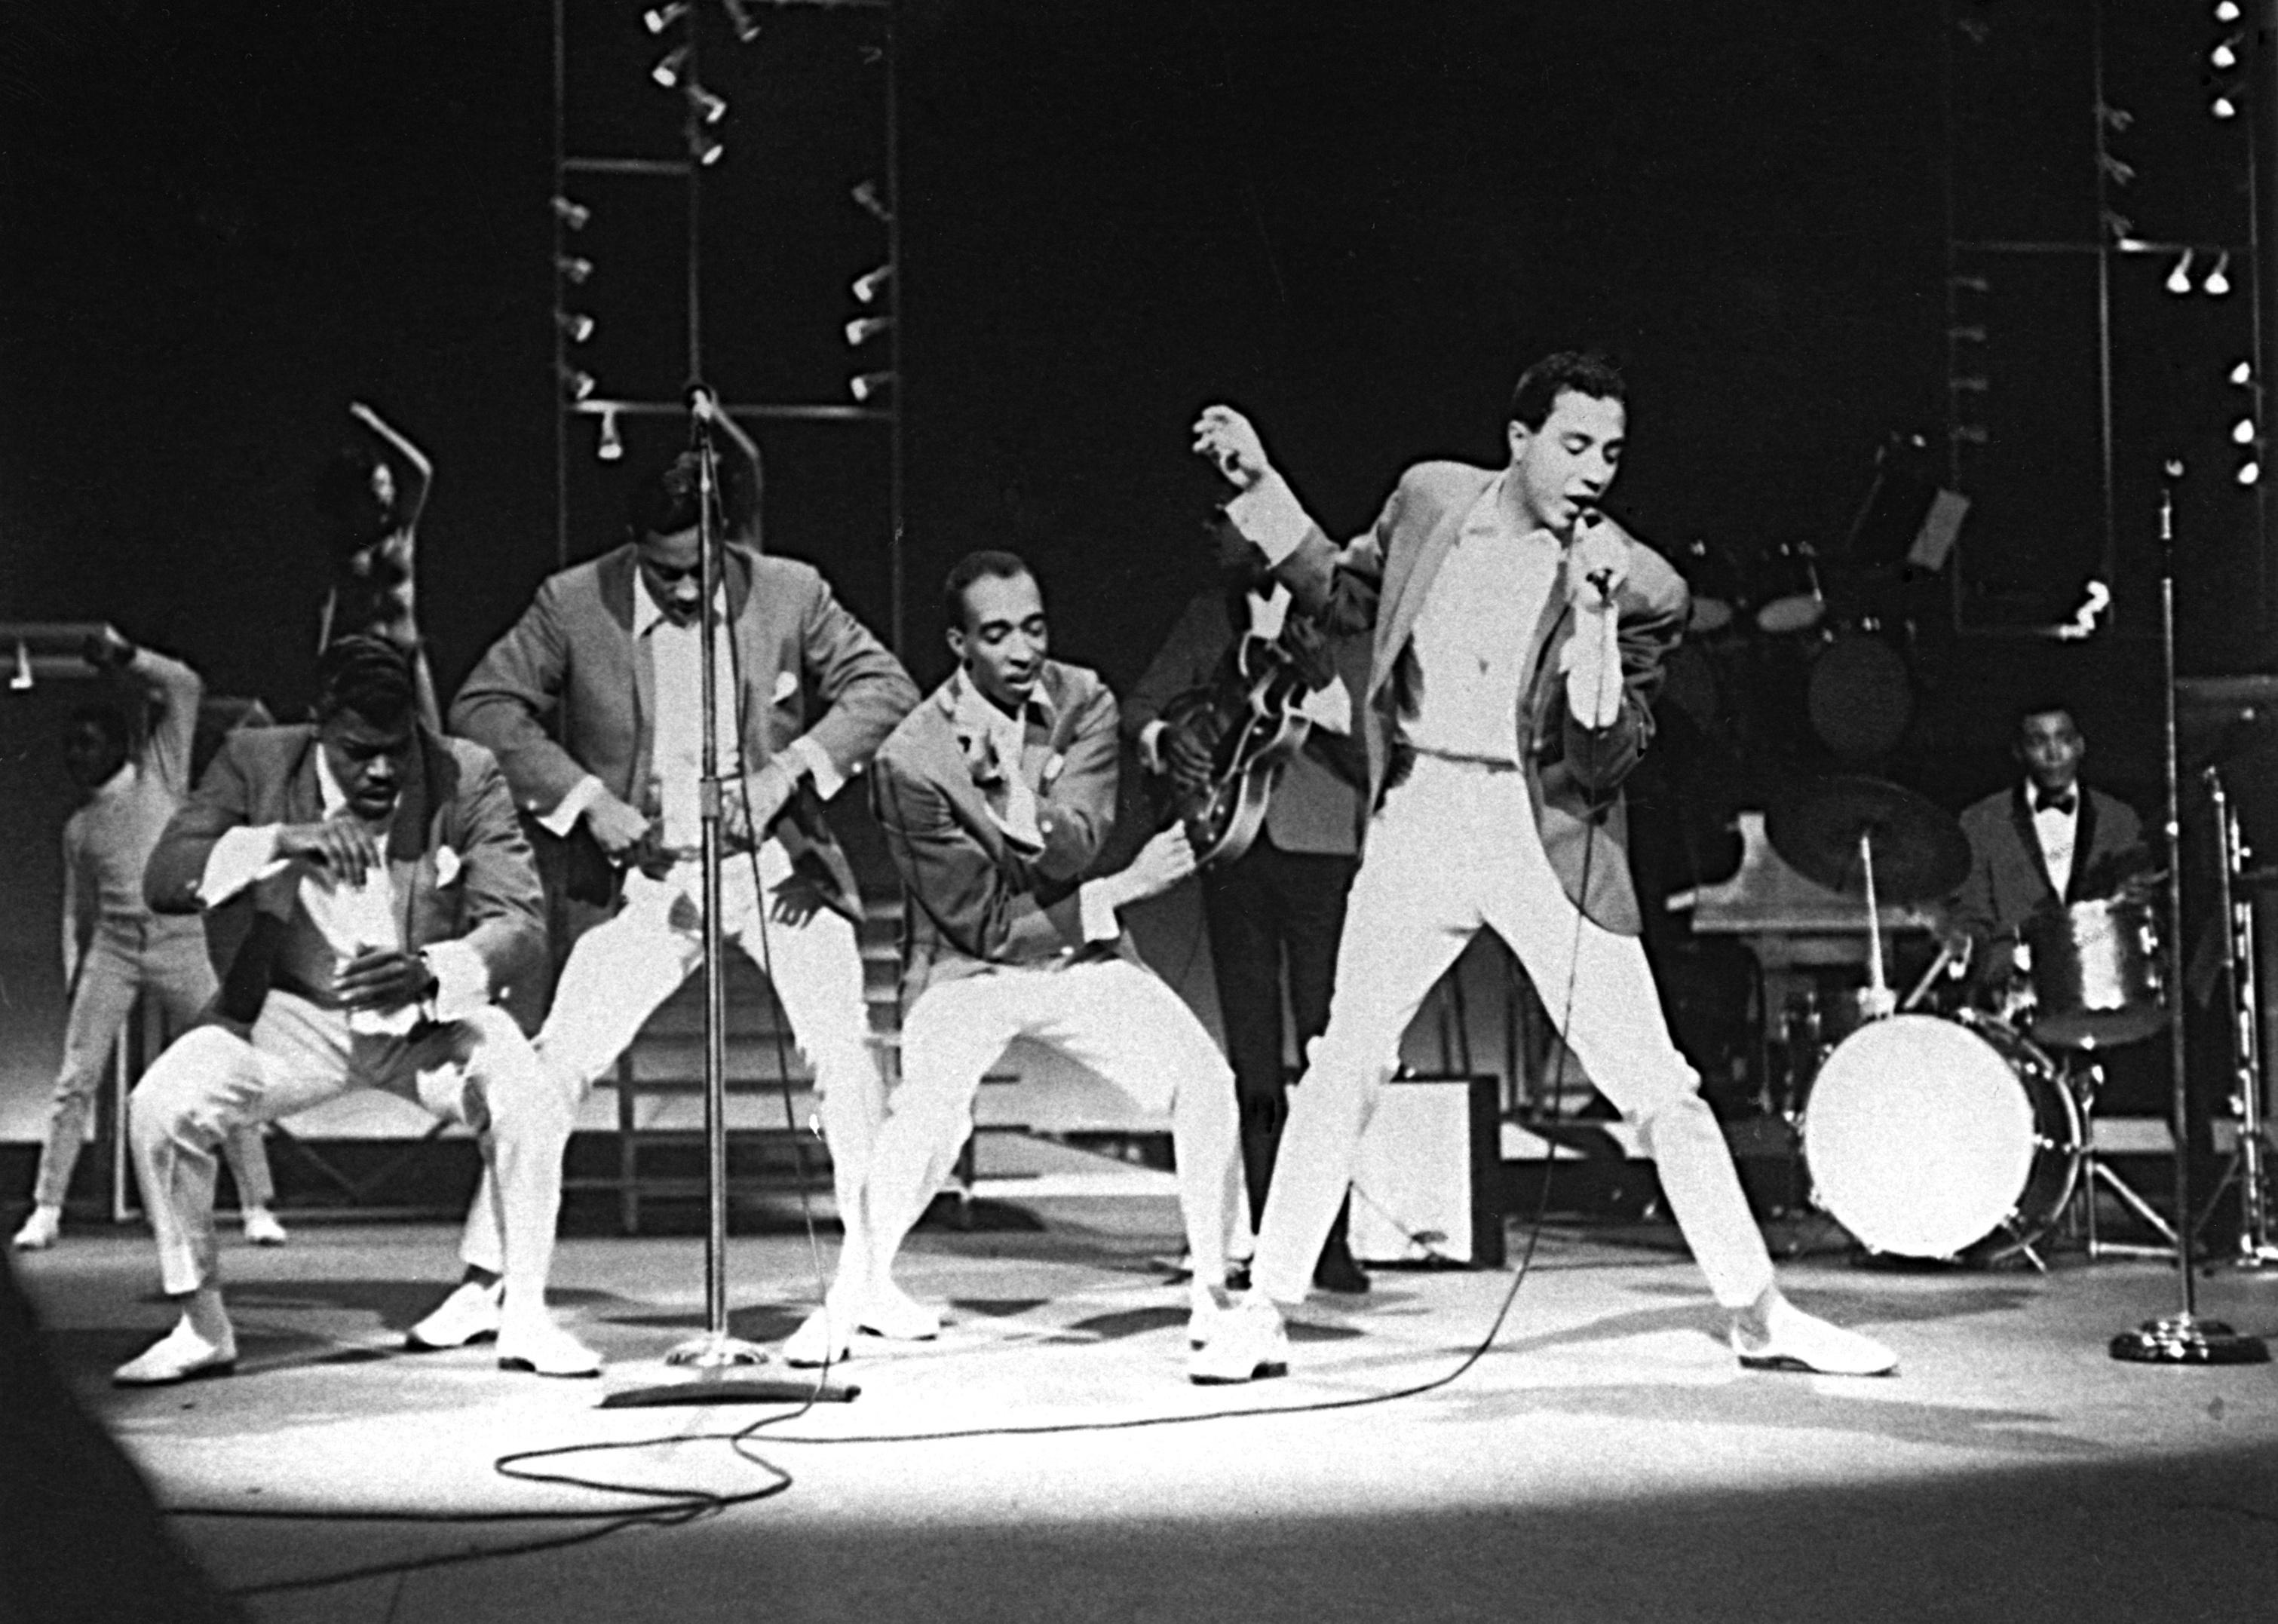 <p>Featuring a smorgasbord of contemporary talent, The T.A.M.I. Show spanned two days and provided the basis for a subsequent concert film. The Rolling Stones went on after a vivacious James Brown and later called it one of the <a href="https://www.mprnews.org/story/2014/10/27/music">biggest mistakes of their career</a>. Additional performers included The Supremes, The Beach Boys, Chuck Berry, Marvin Gaye, and others.</p> <p><strong>You may also like:</strong> <a href="https://stacker.com/music/one-hit-wonders-hip-hop">One-hit wonders of hip-hop</a></p>